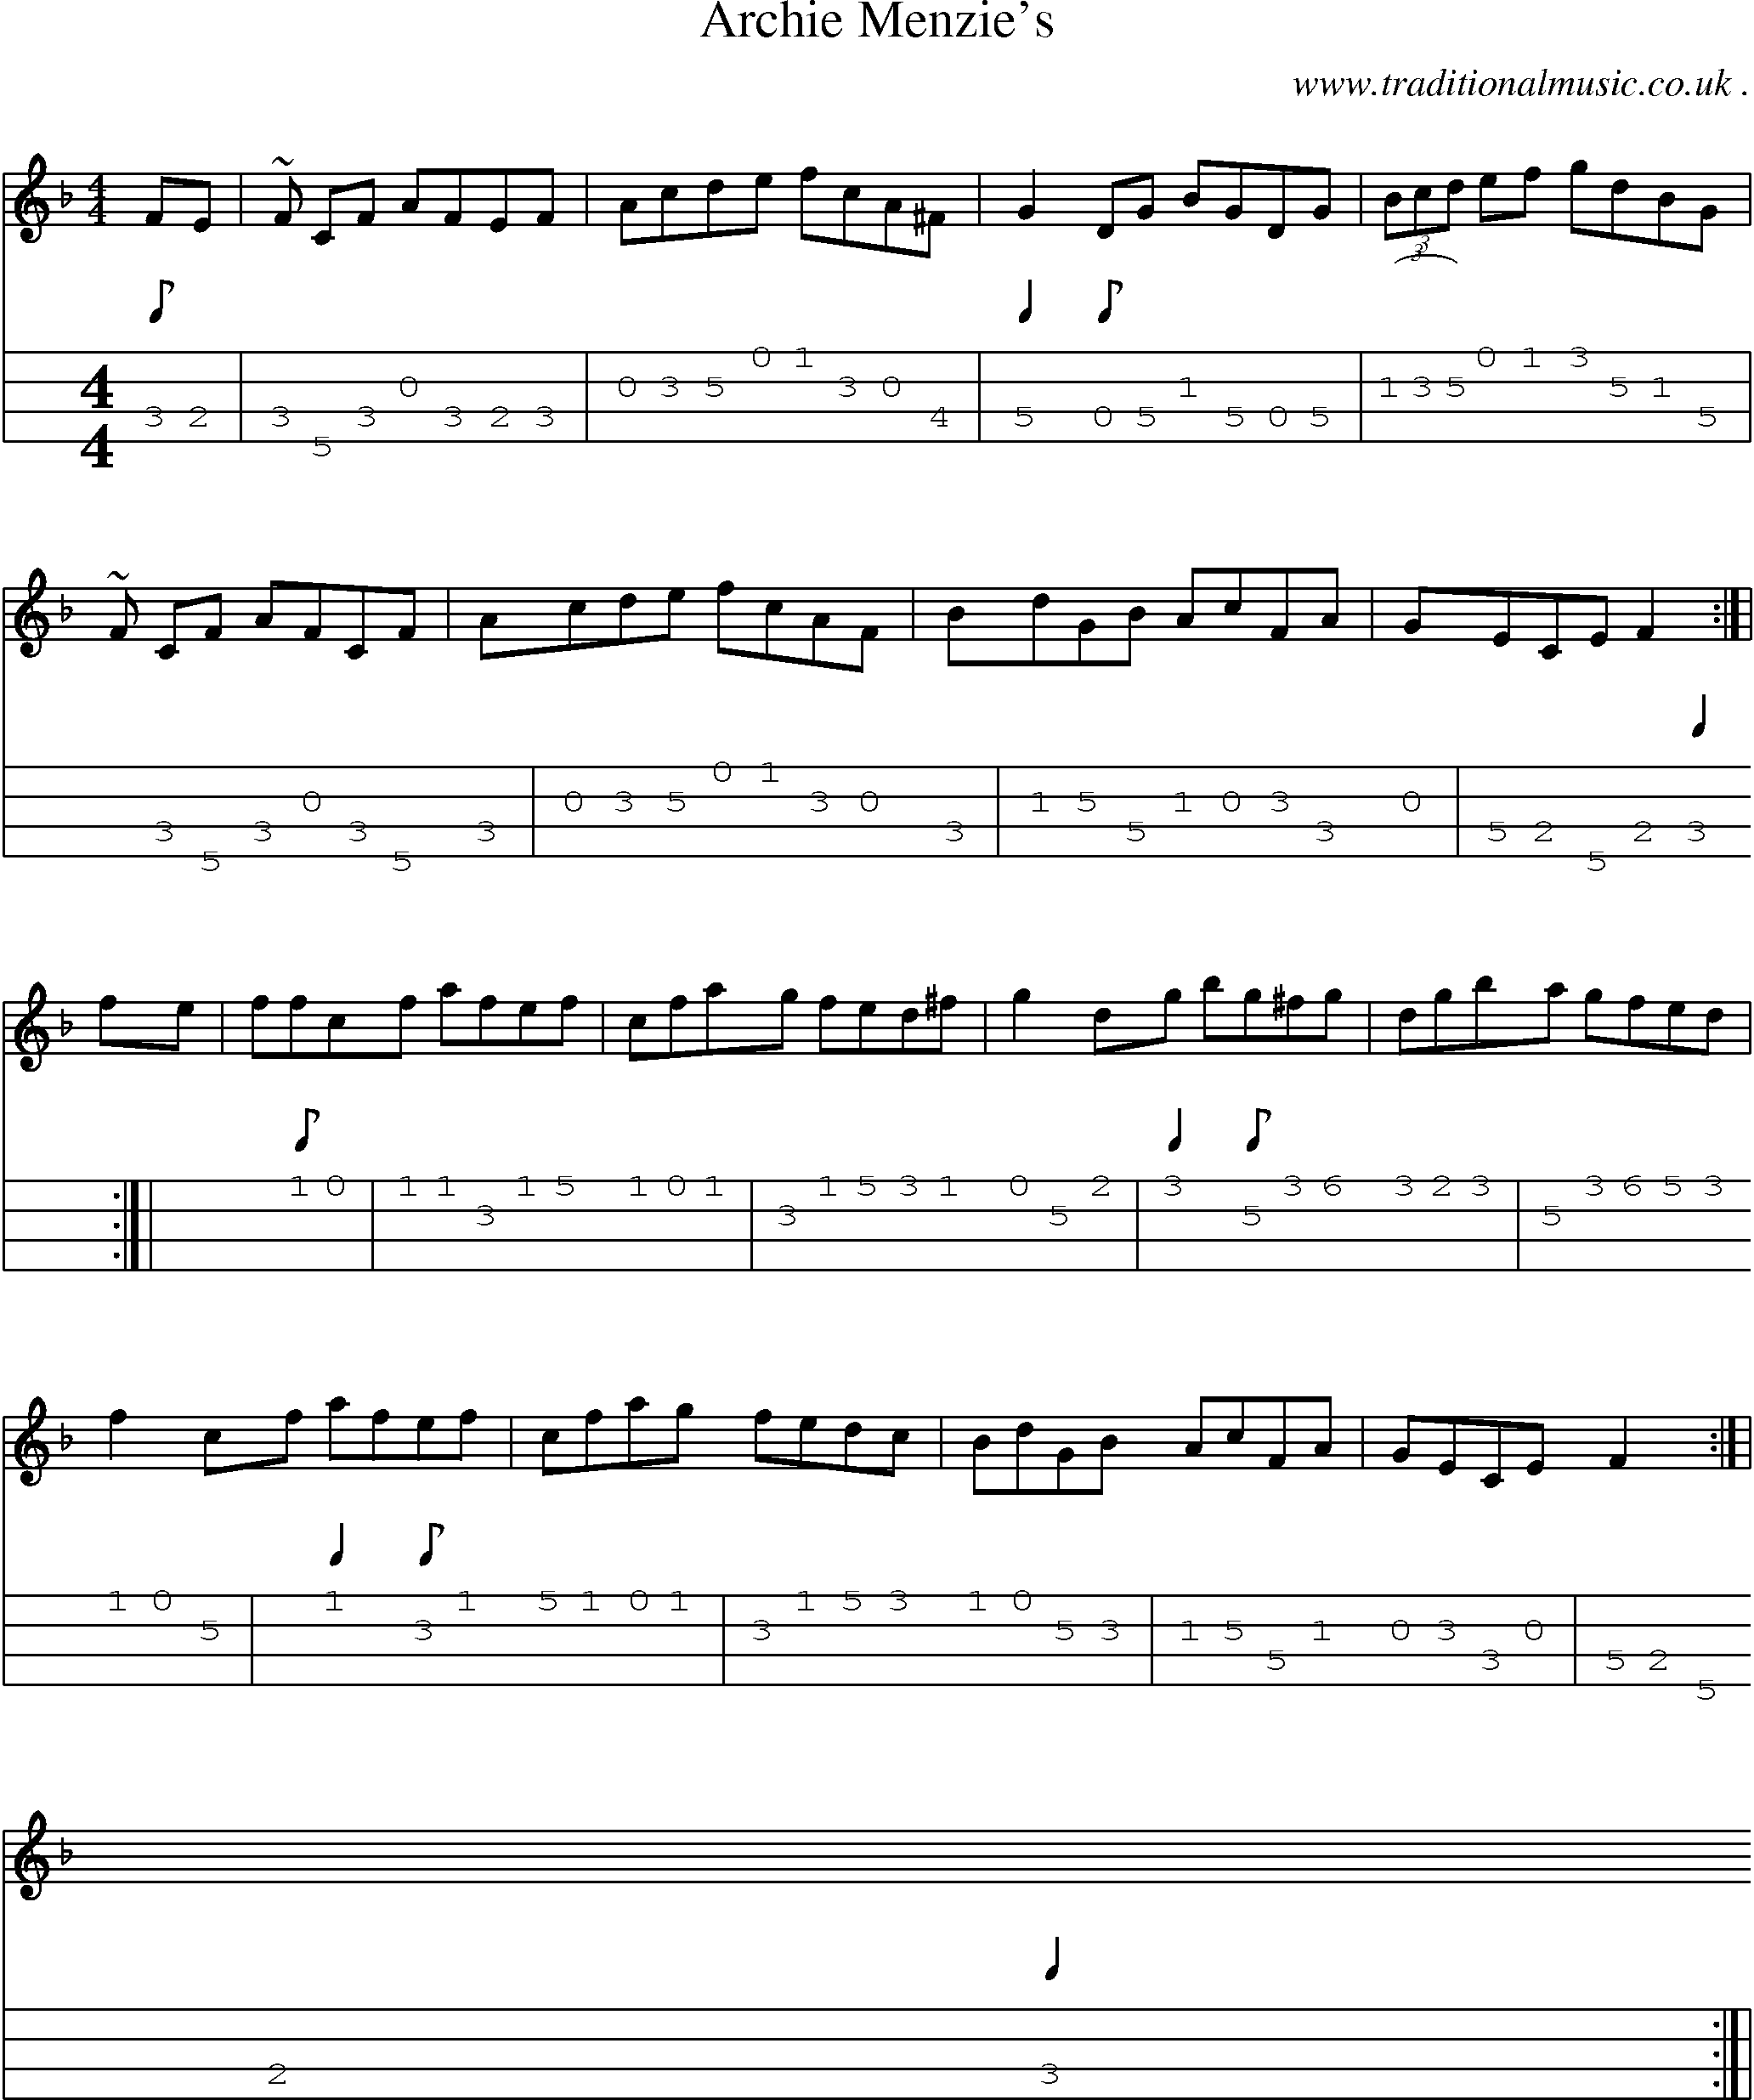 Sheet-music  score, Chords and Mandolin Tabs for Archie Menzies1